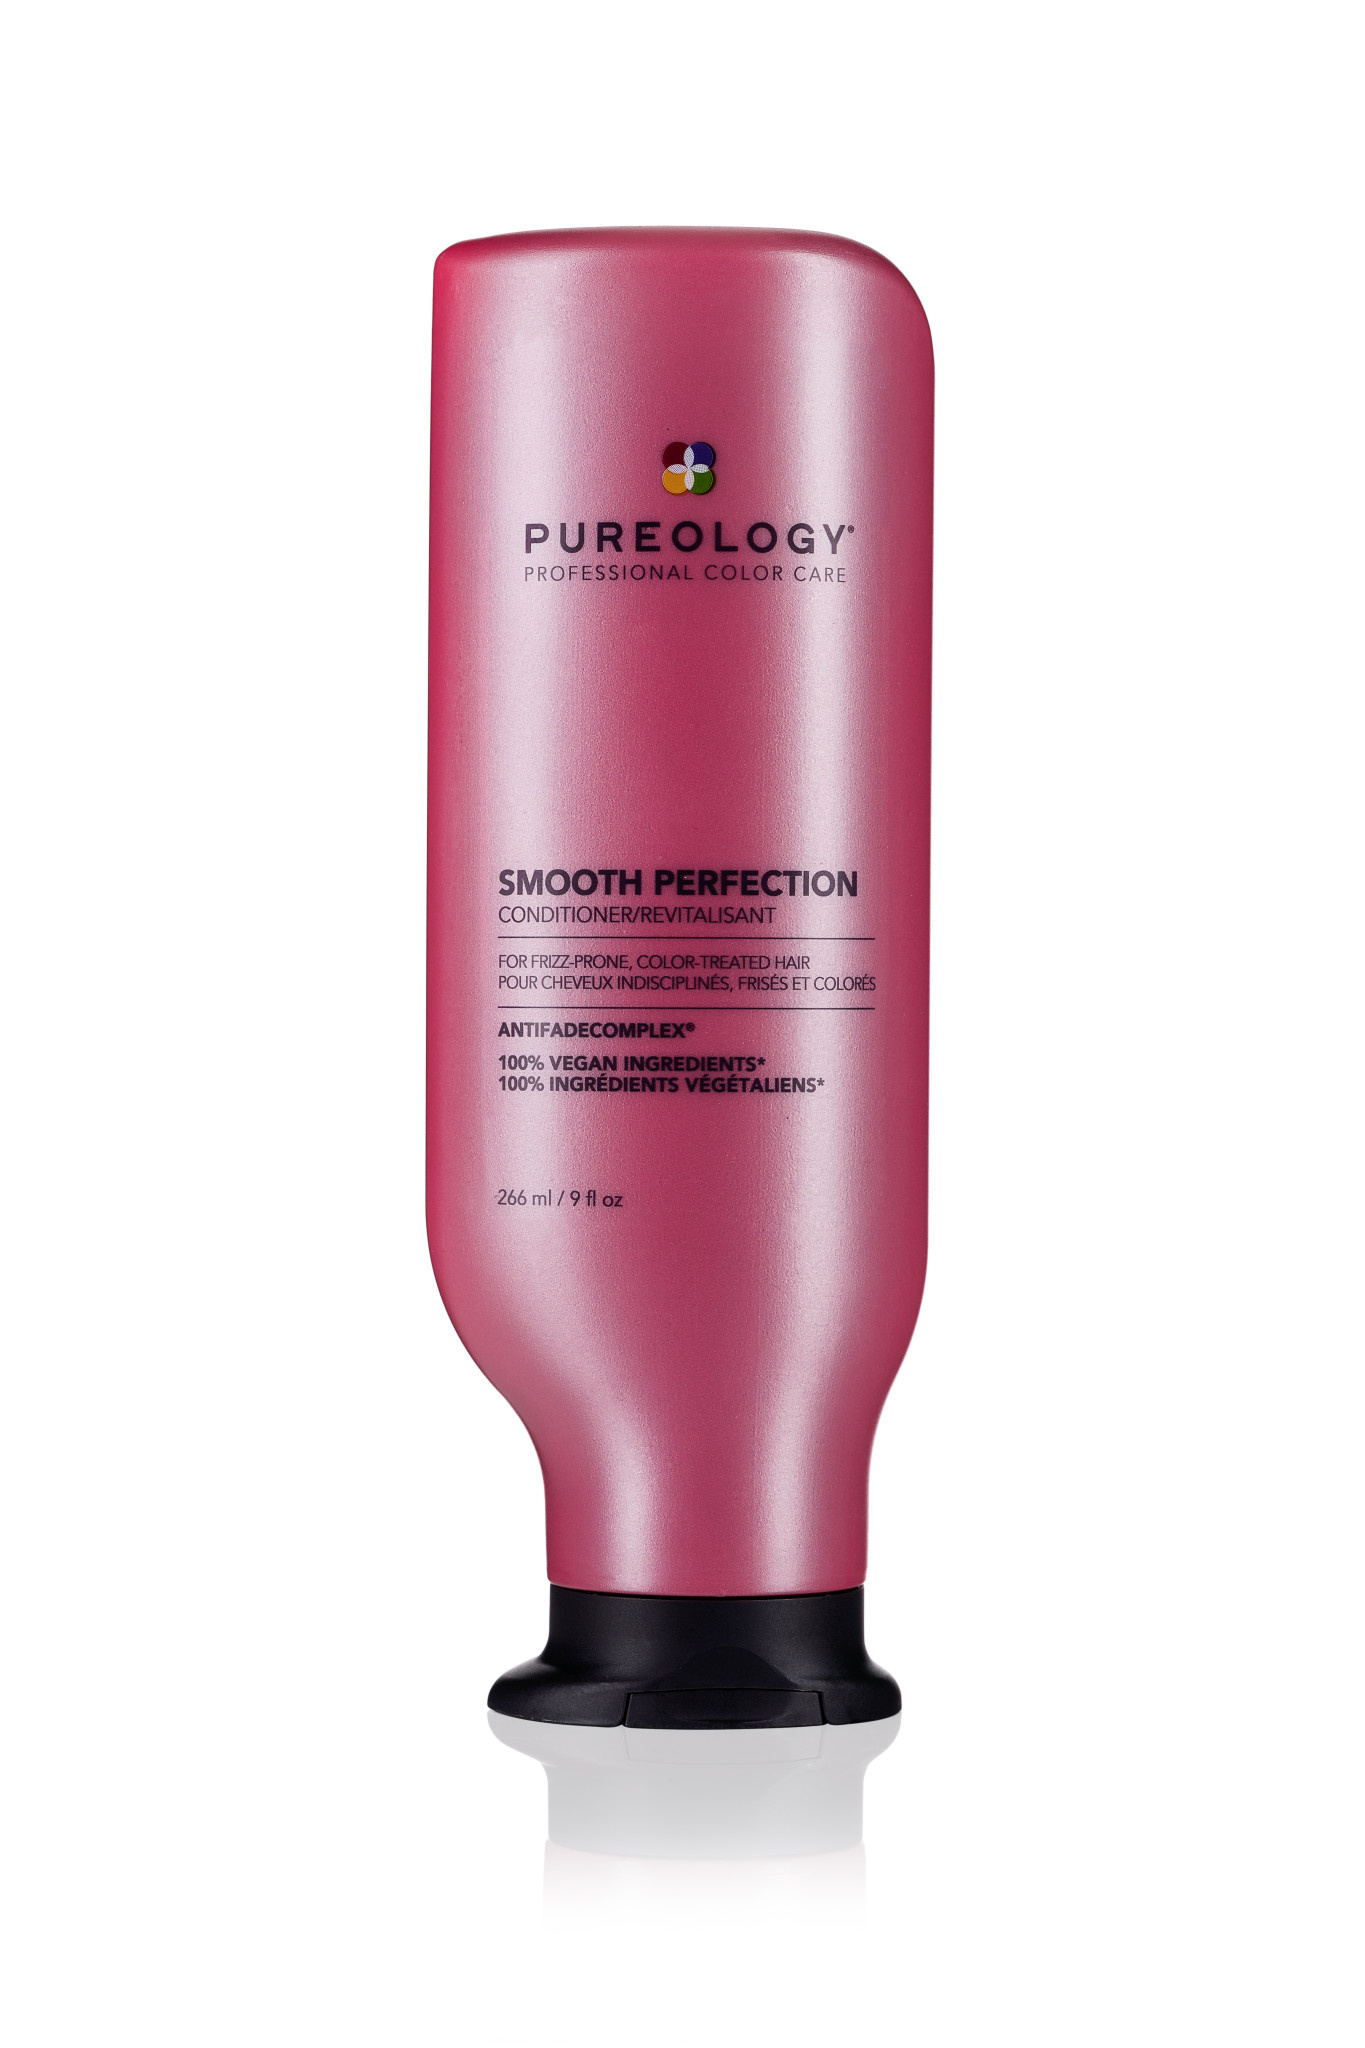 Pureology Smooth Perfection Shampoo OR Conditioner Duo 8.5 oz